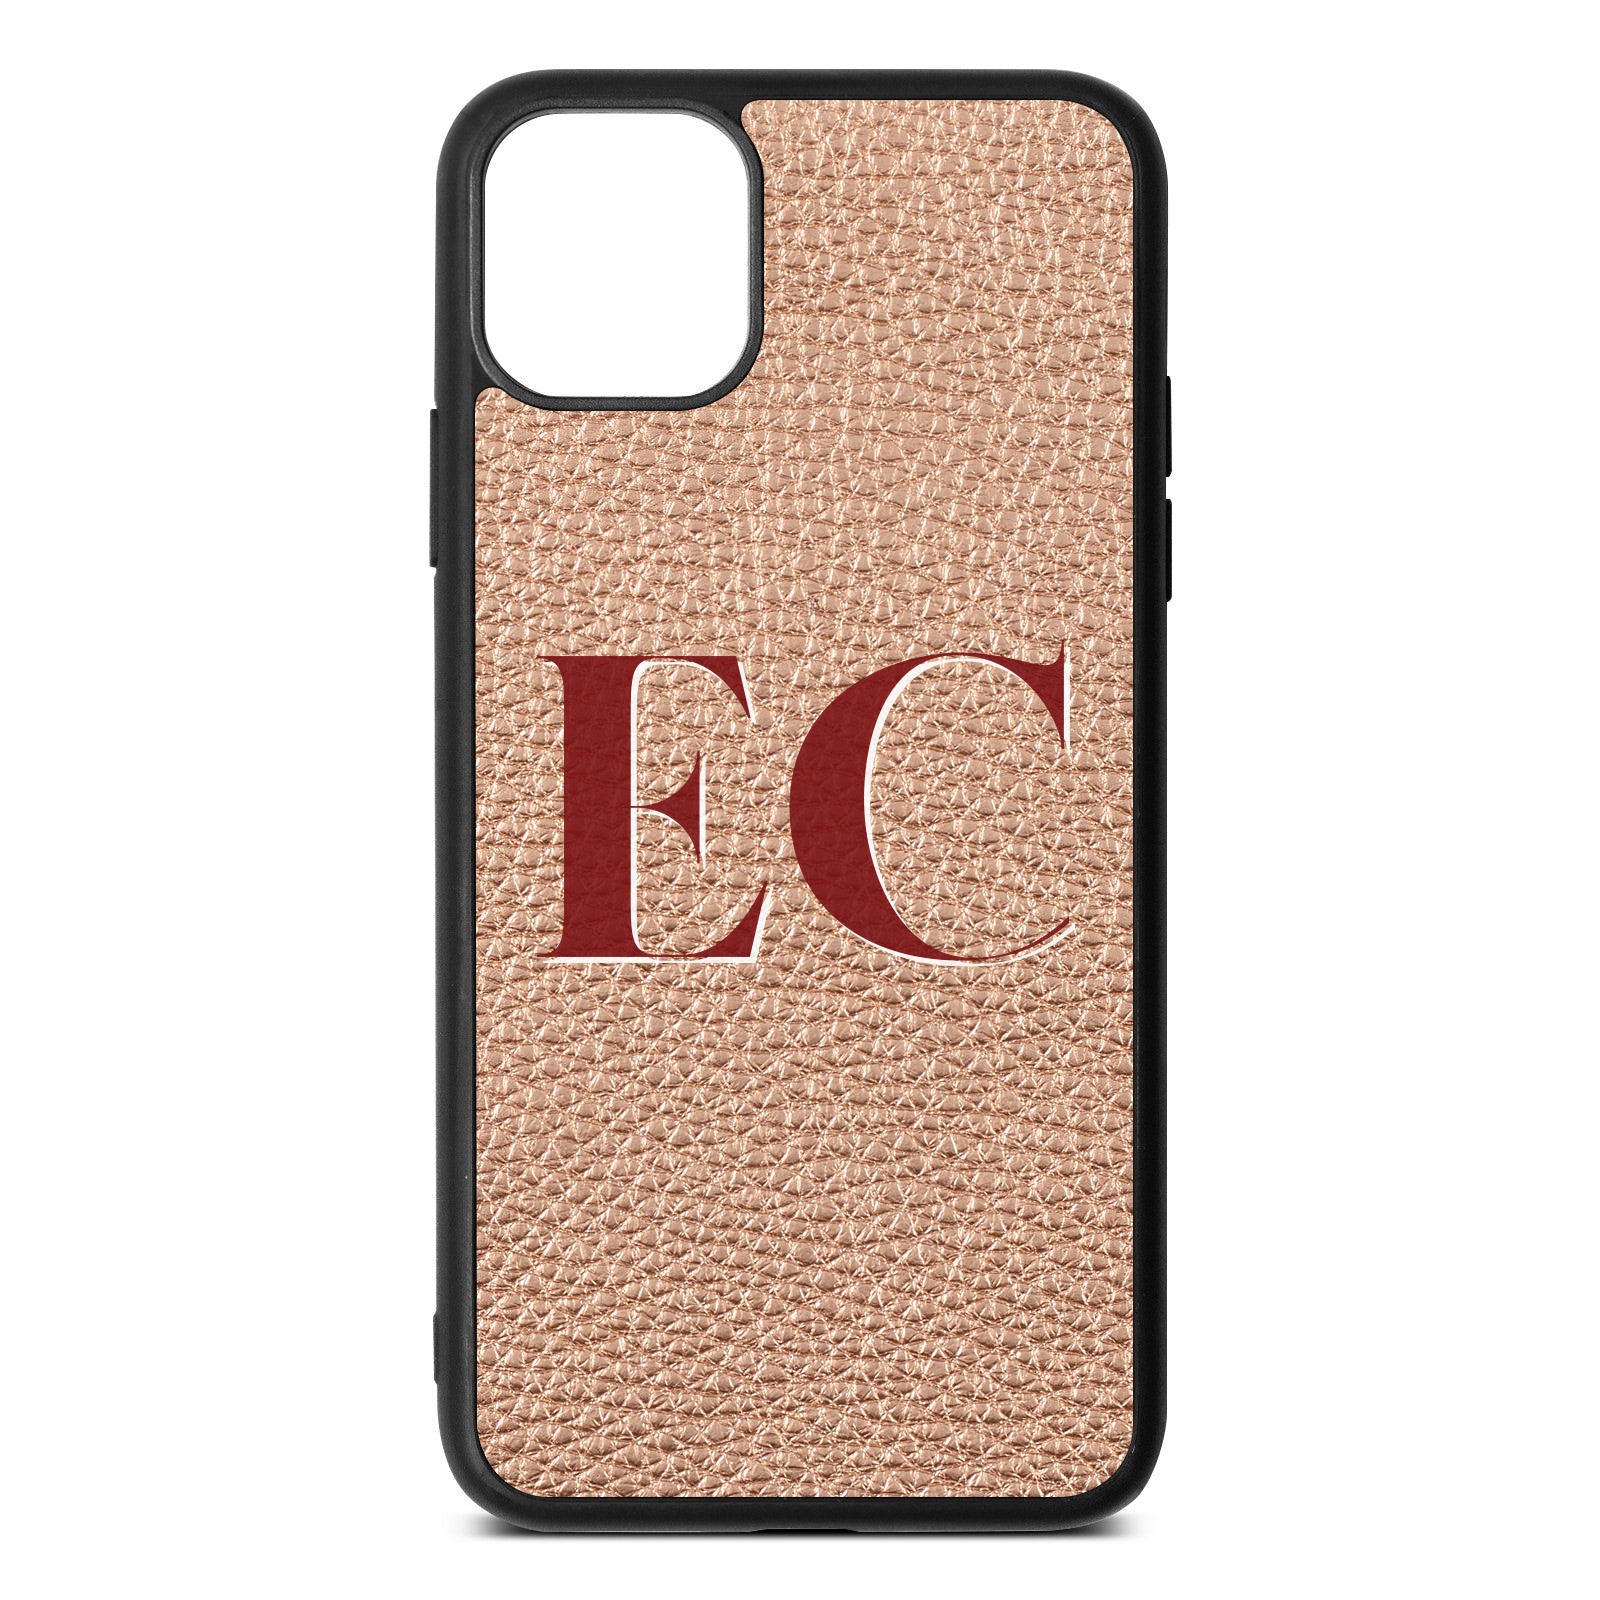 iPhone 11 Pro Max Rose Gold Pebble Leather Case